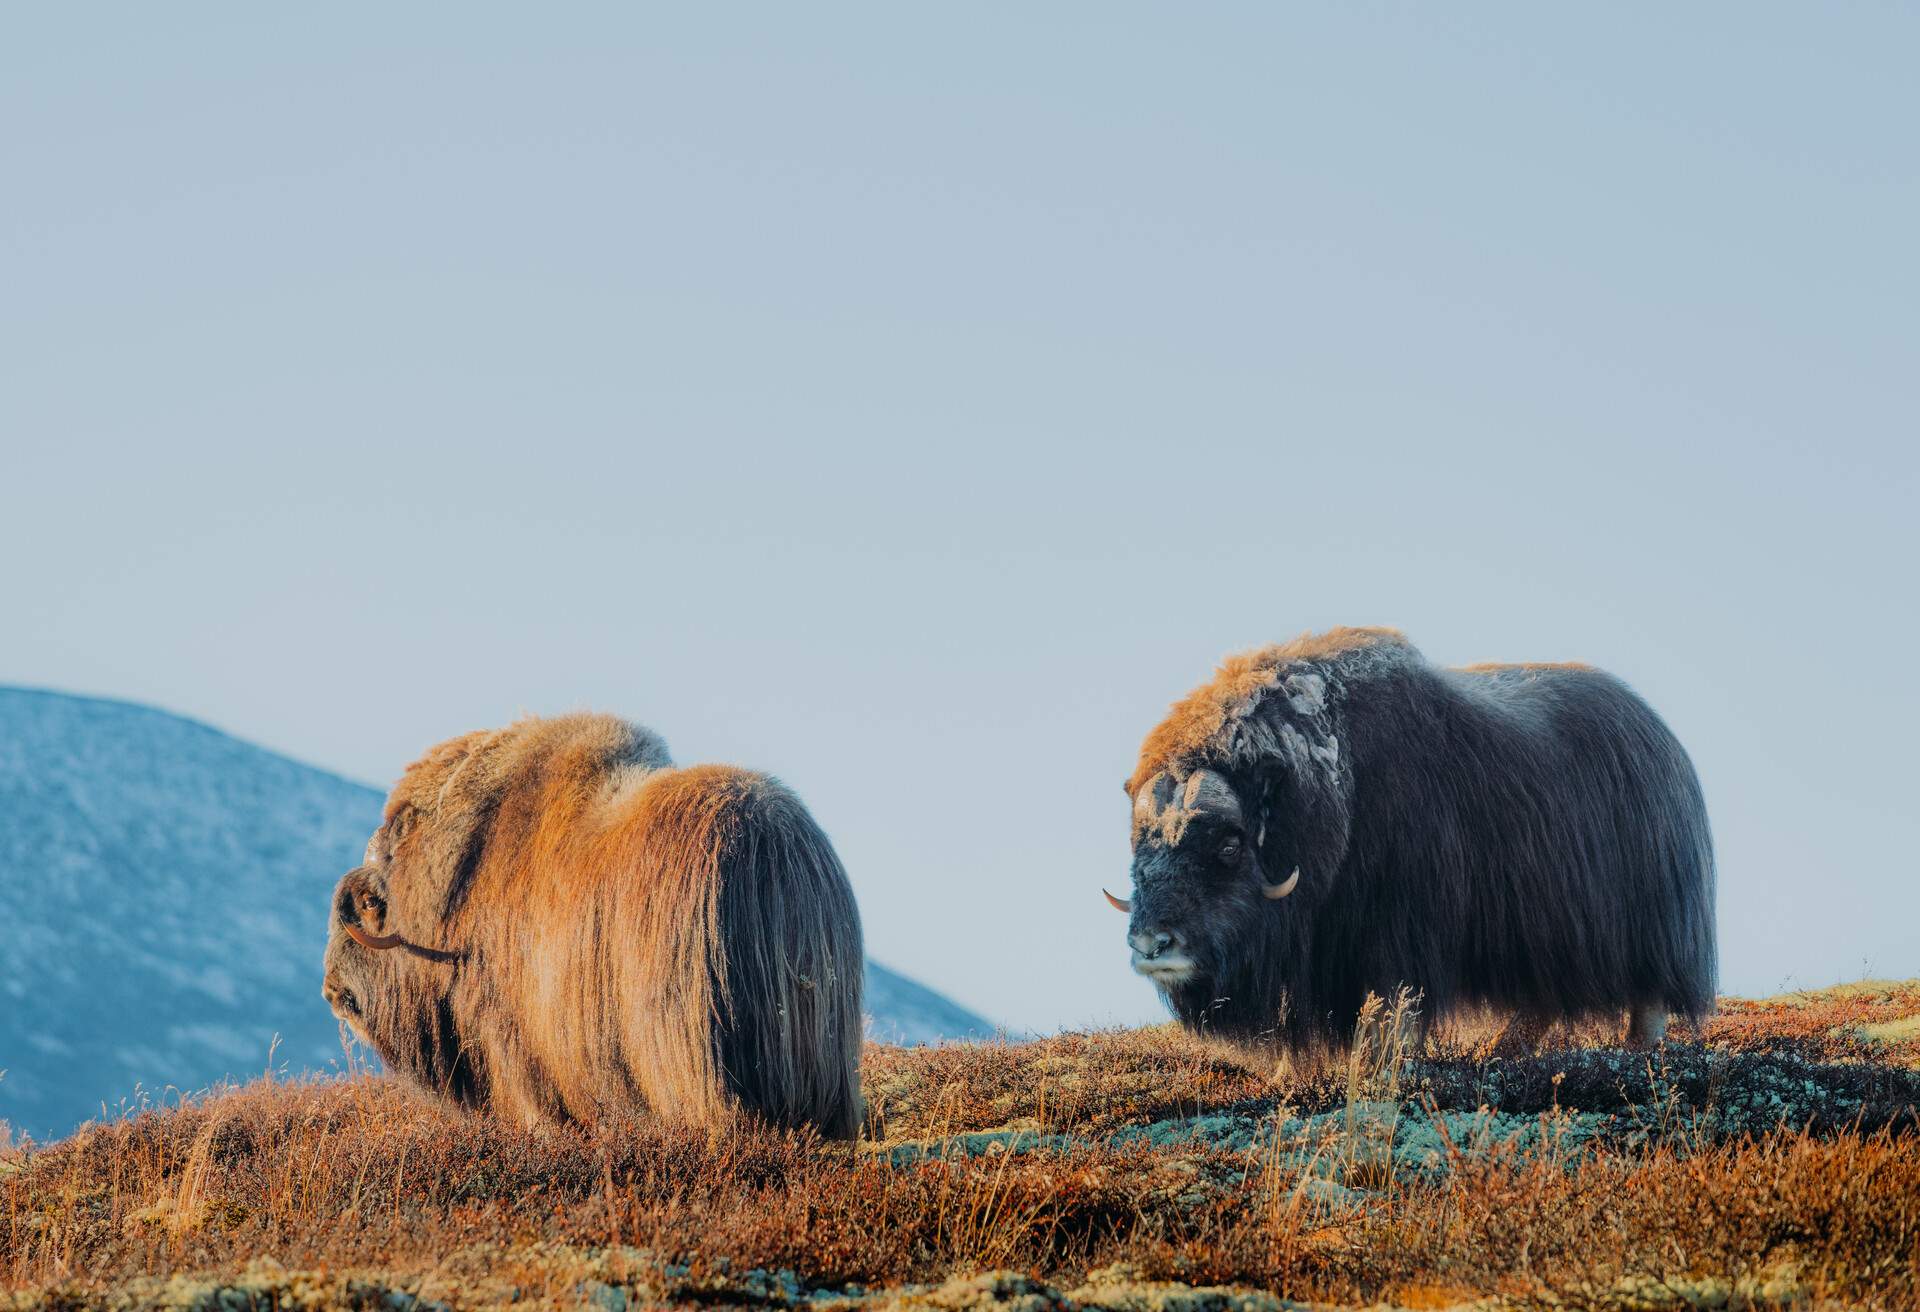 Two muskoxen wild animals charging at one another on the hills surrounded by the scenic mountains of Dovrefjell, Central Norway